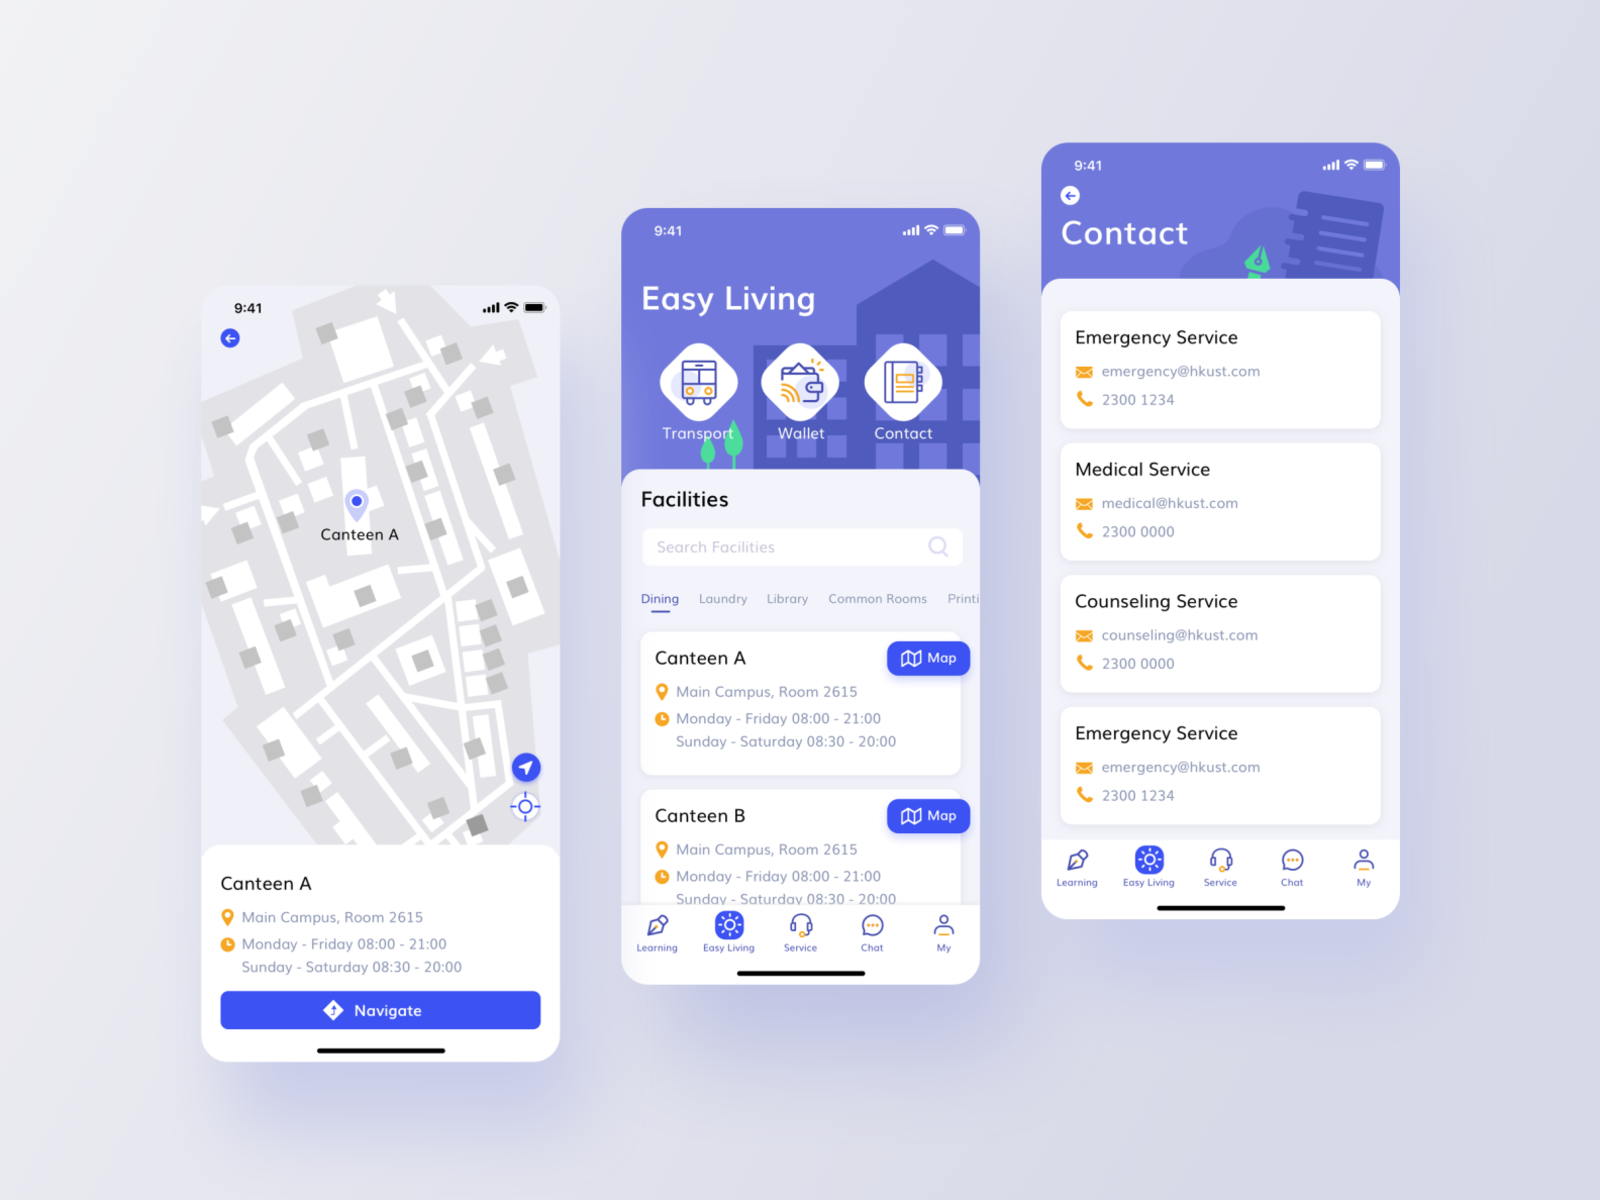 Student App - Campus Life by Miro Zeng on Dribbble